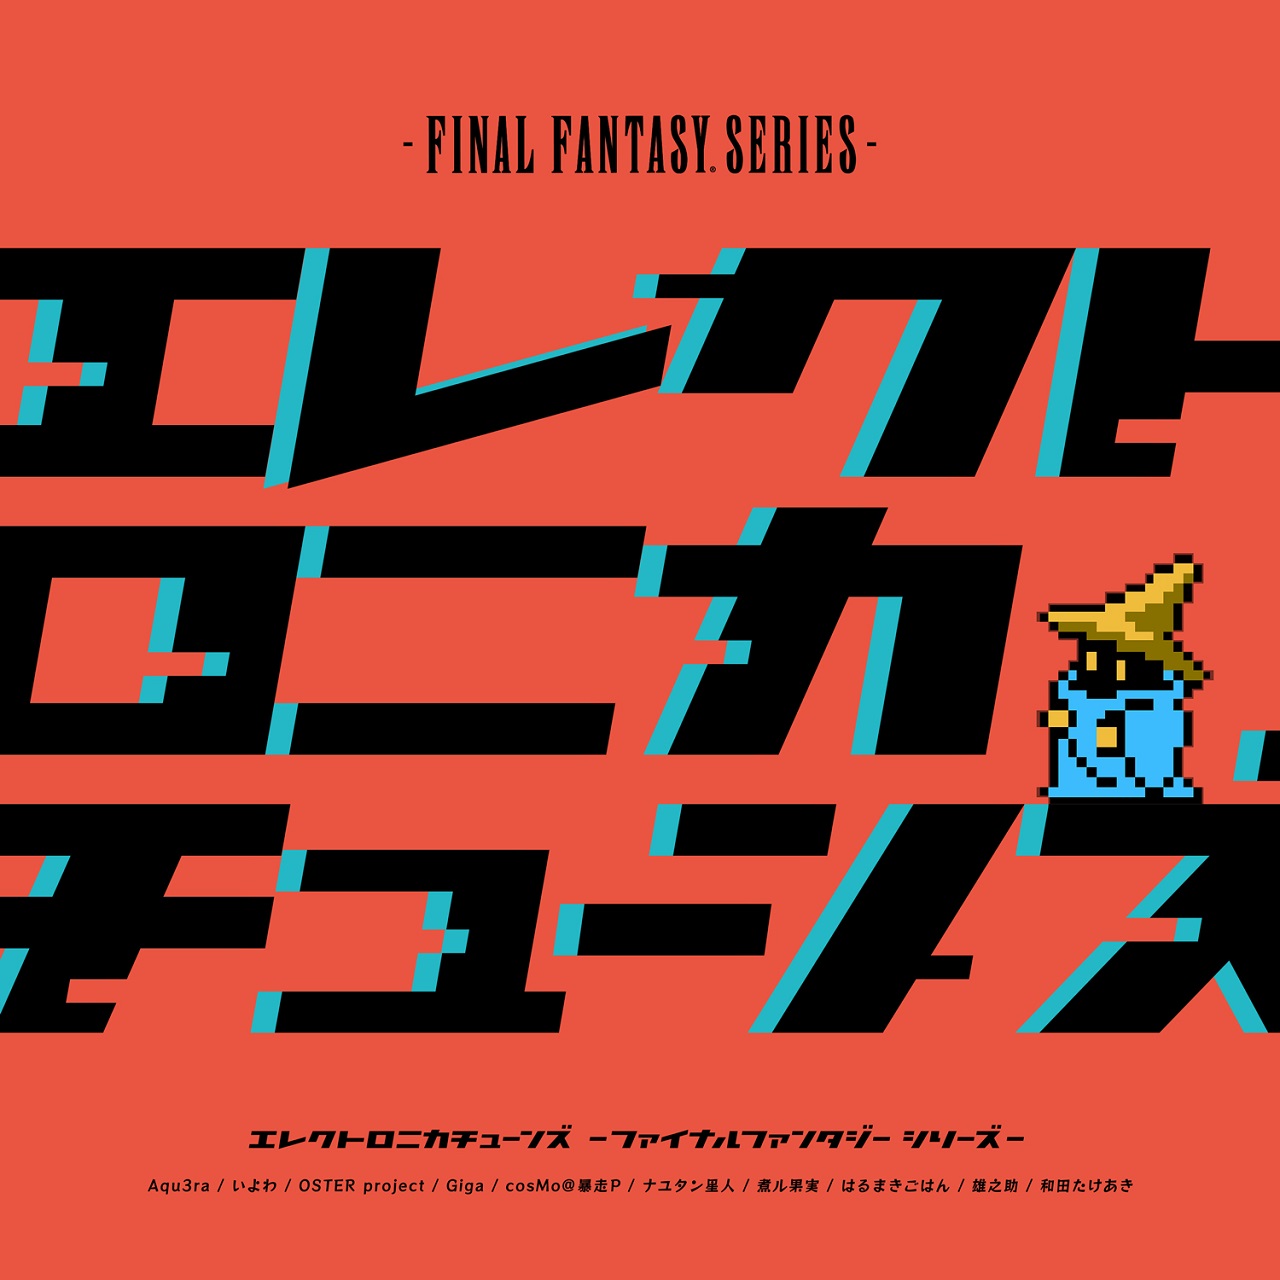 A Final Fantasy arrangement compilation by Vocaloid producers has been announced